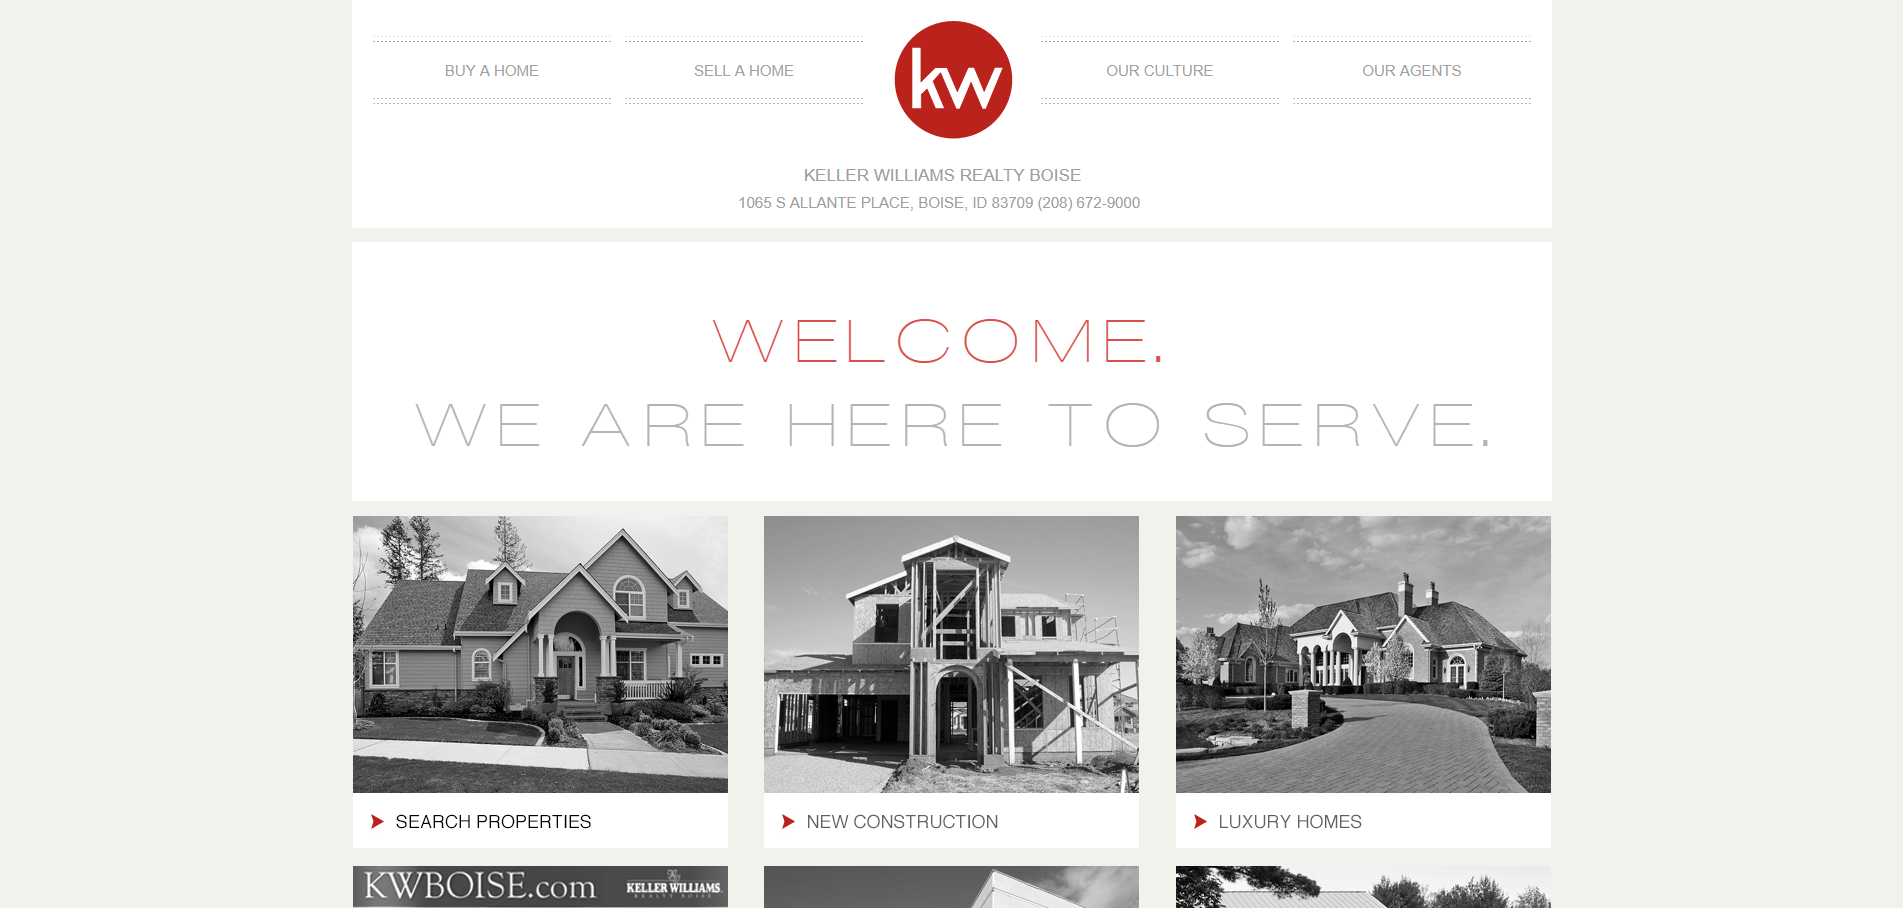  Check this out!  This is a list of the 101 best real estate websites.  We ranked each site 1-101 and reviewed them all.  Here's kwboise.com.  Curious who made the list? 